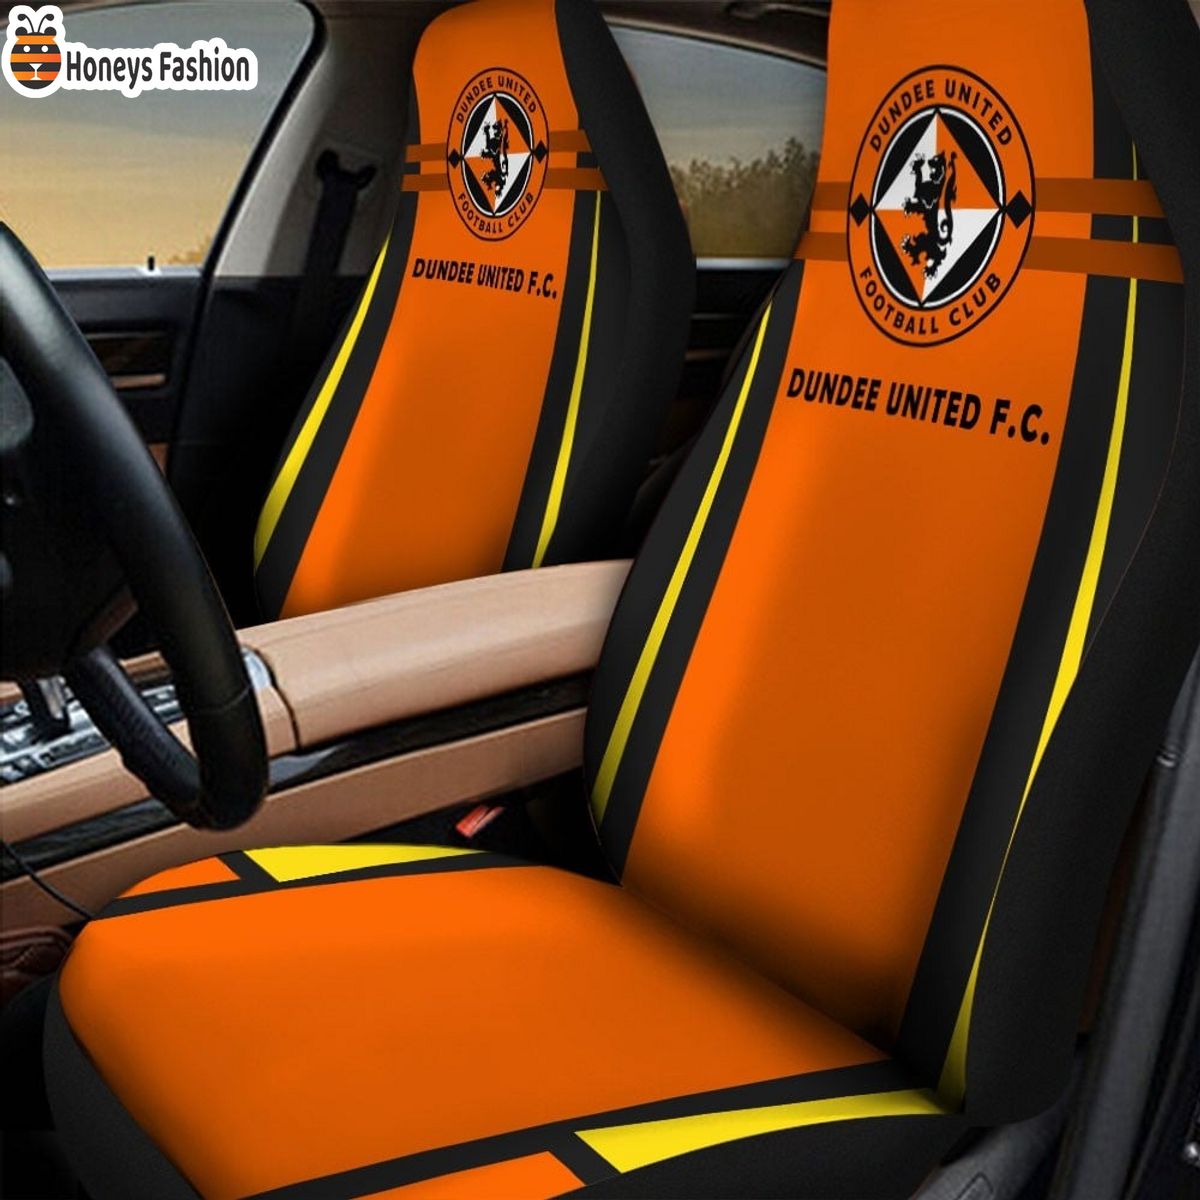 Dundee United F.C. car seat cover